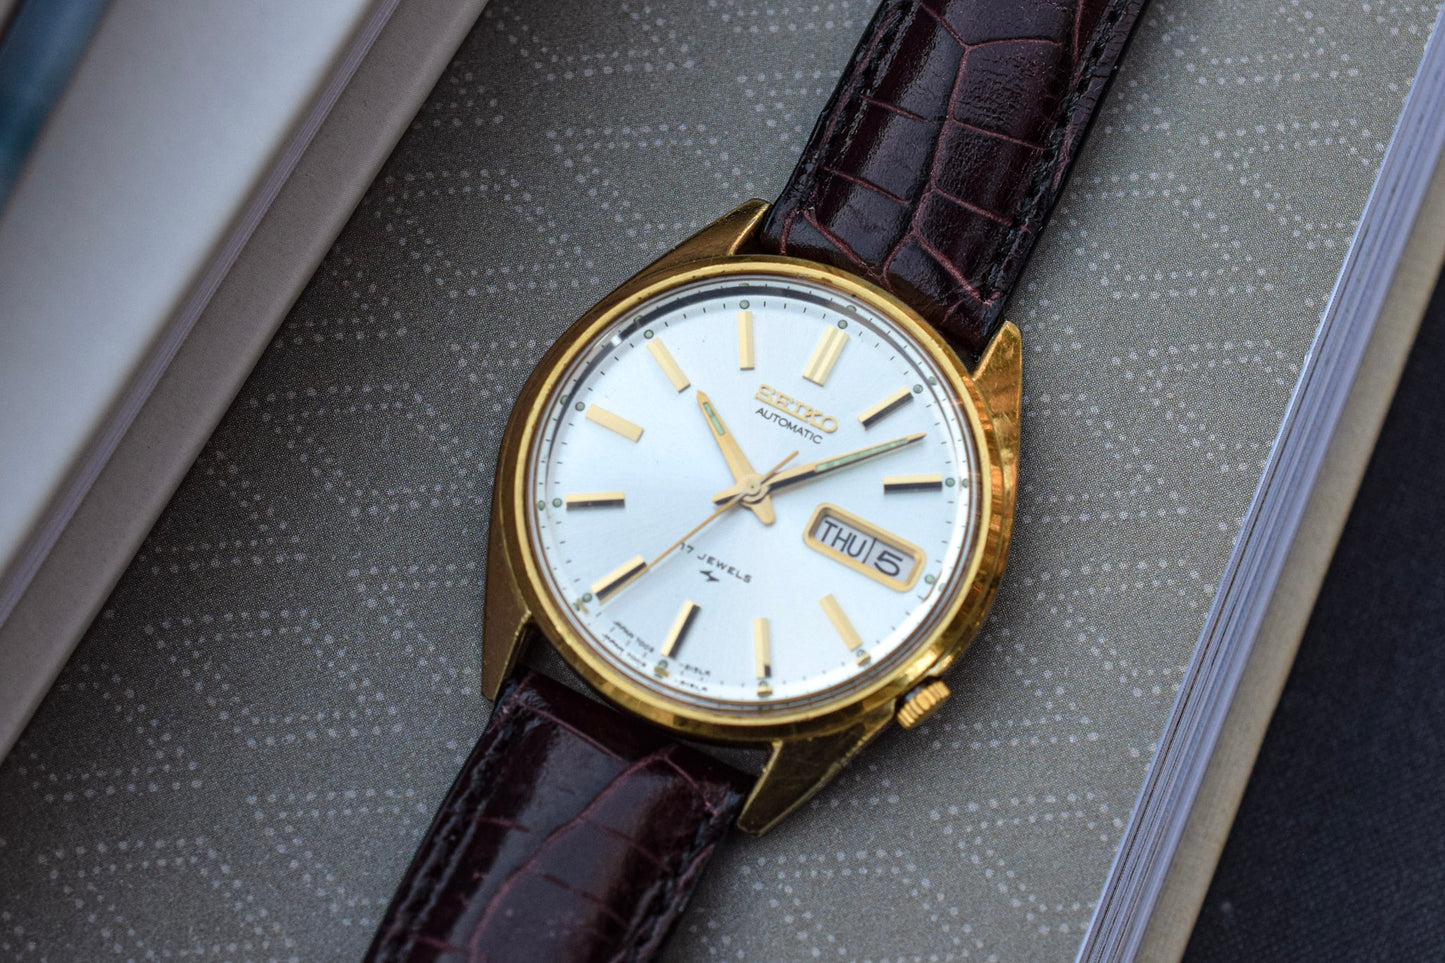 1978 Seiko Automatic Gold-Tone Day/Date Watch